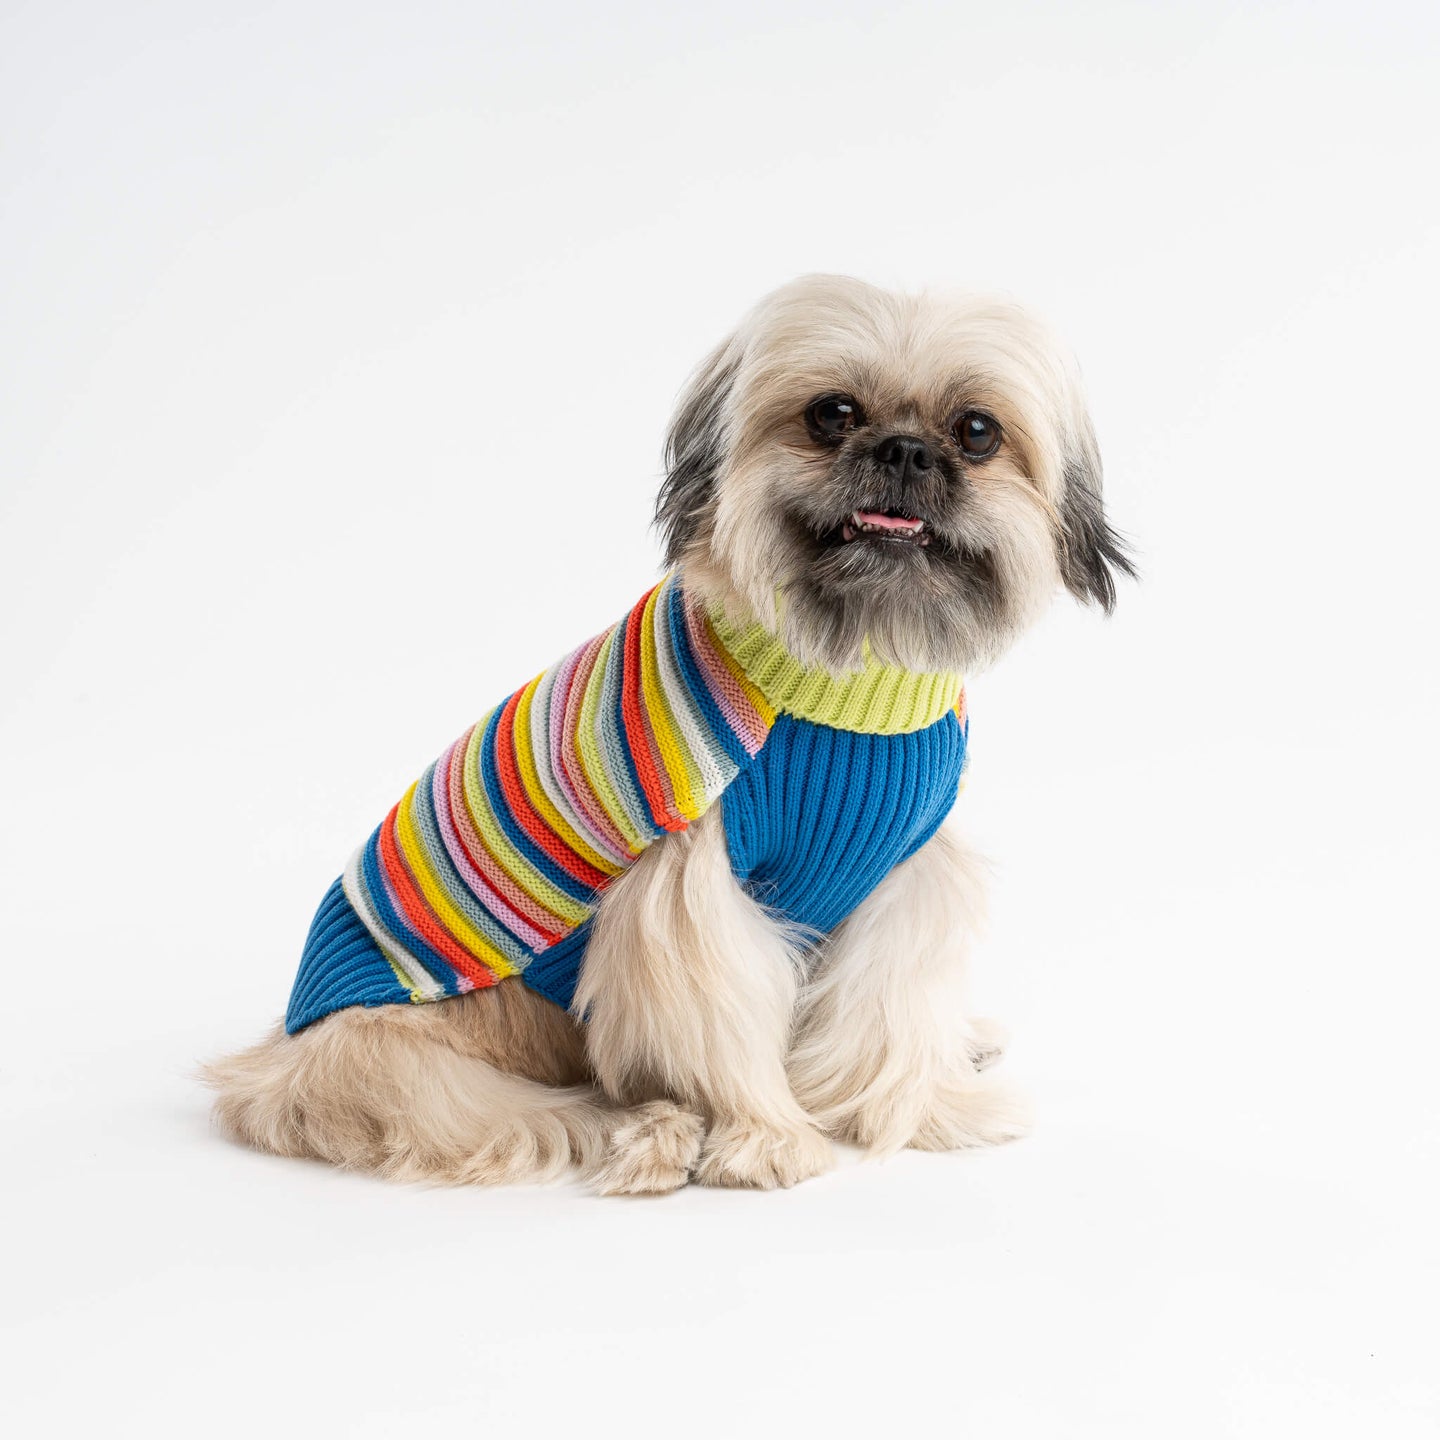 Circus Knit Texture Stripe Rib Dog Sweater Long Warm Easy to Wash